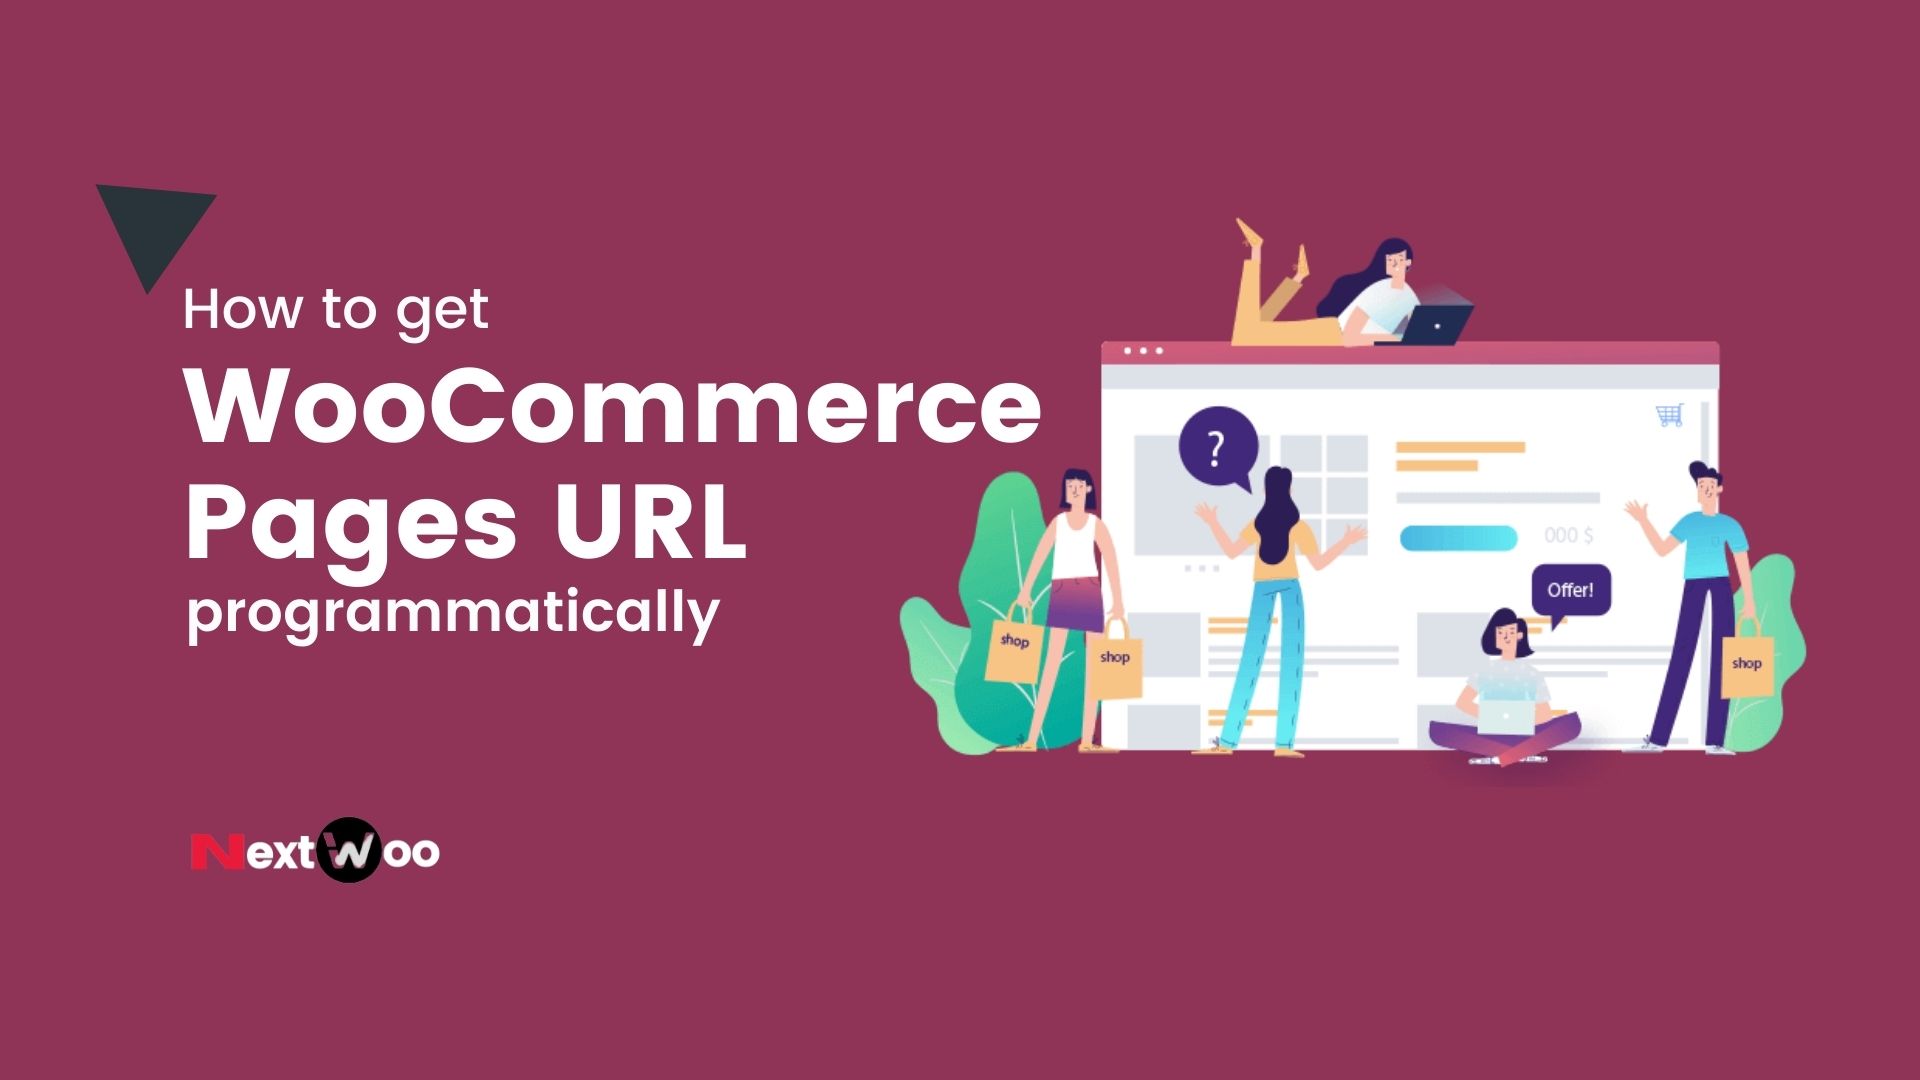 How to get WooCommerce Pages URL programmatically